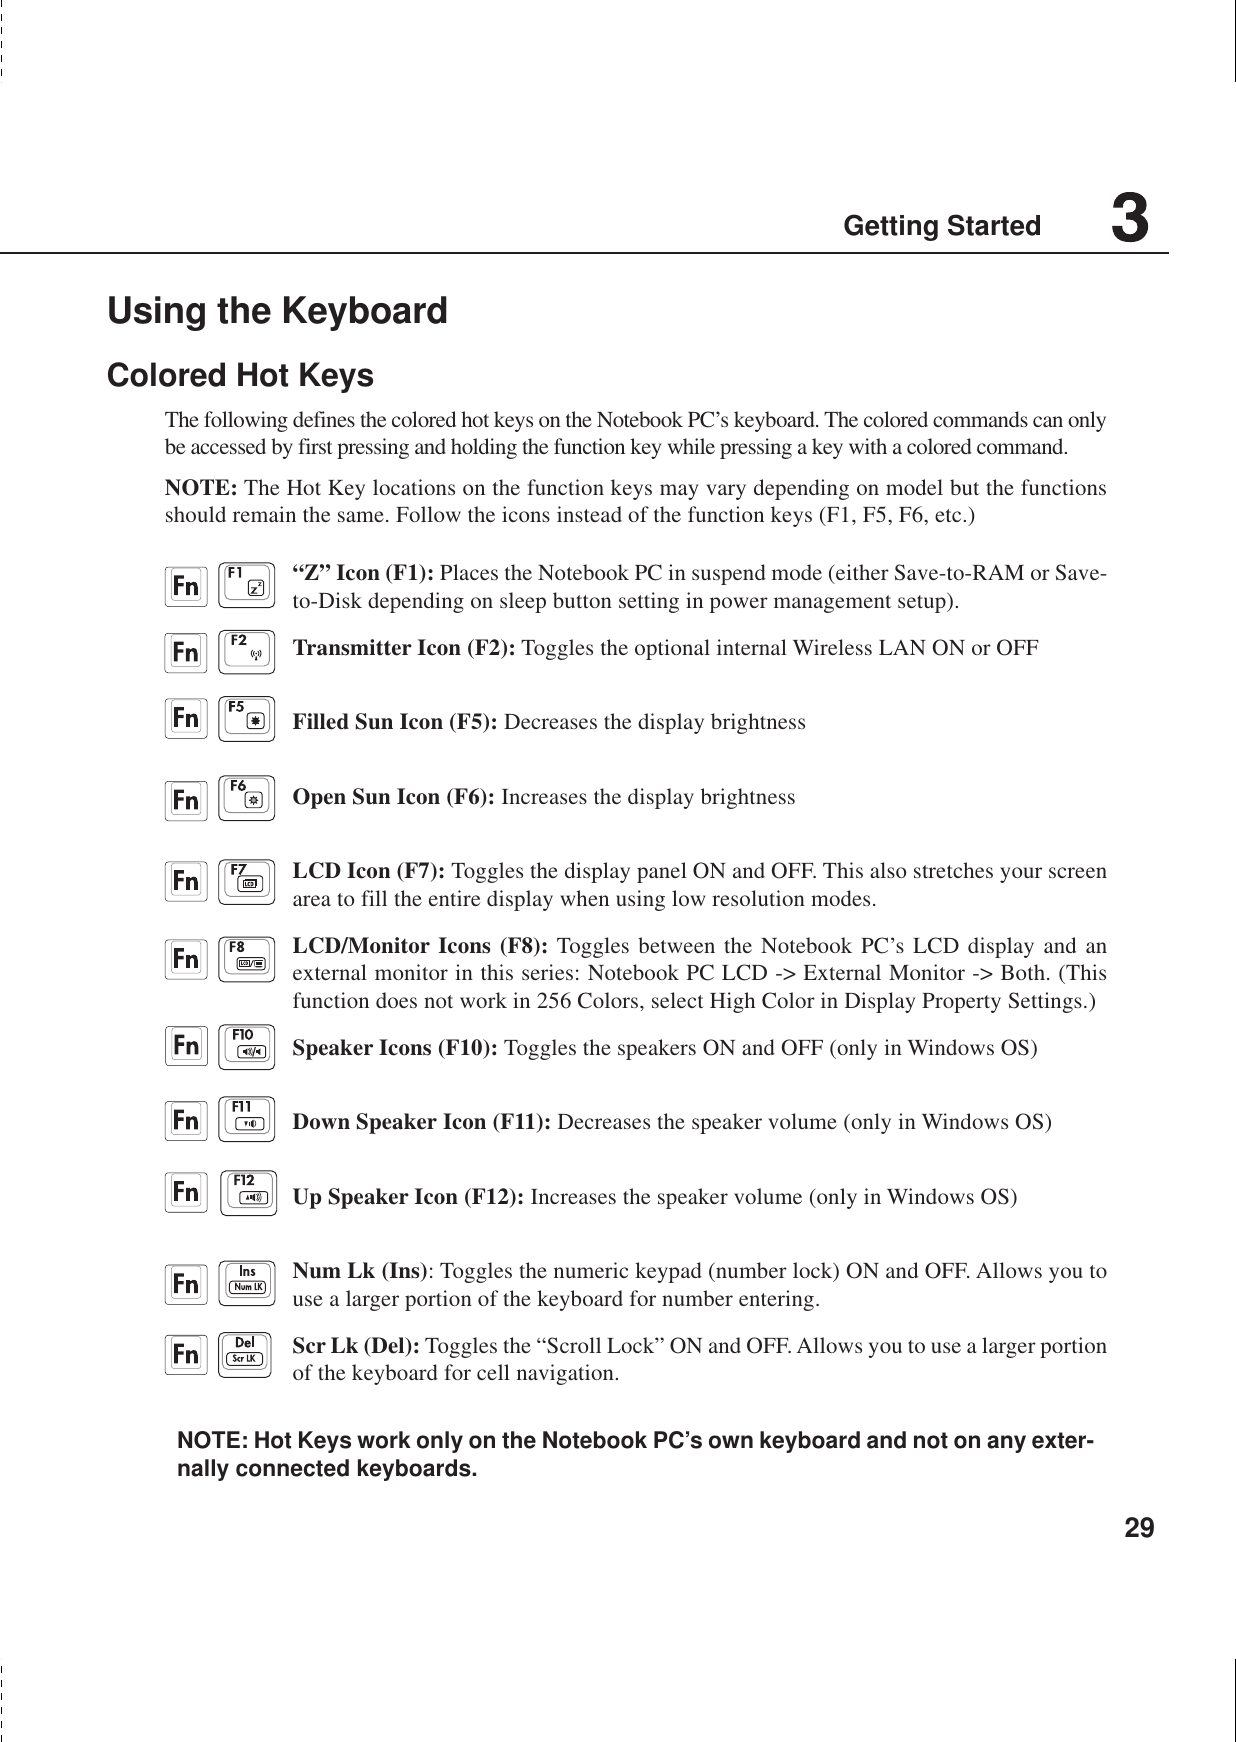 29Getting StartedUsing the KeyboardColored Hot KeysThe following defines the colored hot keys on the Notebook PC’s keyboard. The colored commands can onlybe accessed by first pressing and holding the function key while pressing a key with a colored command.NOTE: The Hot Key locations on the function keys may vary depending on model but the functionsshould remain the same. Follow the icons instead of the function keys (F1, F5, F6, etc.)“Z” Icon (F1): Places the Notebook PC in suspend mode (either Save-to-RAM or Save-to-Disk depending on sleep button setting in power management setup).Transmitter Icon (F2): Toggles the optional internal Wireless LAN ON or OFFFilled Sun Icon (F5): Decreases the display brightnessOpen Sun Icon (F6): Increases the display brightnessLCD Icon (F7): Toggles the display panel ON and OFF. This also stretches your screenarea to fill the entire display when using low resolution modes.LCD/Monitor Icons (F8): Toggles between the Notebook PC’s LCD display and anexternal monitor in this series: Notebook PC LCD -&gt; External Monitor -&gt; Both. (Thisfunction does not work in 256 Colors, select High Color in Display Property Settings.)Speaker Icons (F10): Toggles the speakers ON and OFF (only in Windows OS)Down Speaker Icon (F11): Decreases the speaker volume (only in Windows OS)Up Speaker Icon (F12): Increases the speaker volume (only in Windows OS)Num Lk (Ins): Toggles the numeric keypad (number lock) ON and OFF. Allows you touse a larger portion of the keyboard for number entering.Scr Lk (Del): Toggles the “Scroll Lock” ON and OFF. Allows you to use a larger portionof the keyboard for cell navigation.NOTE: Hot Keys work only on the Notebook PC’s own keyboard and not on any exter-nally connected keyboards.